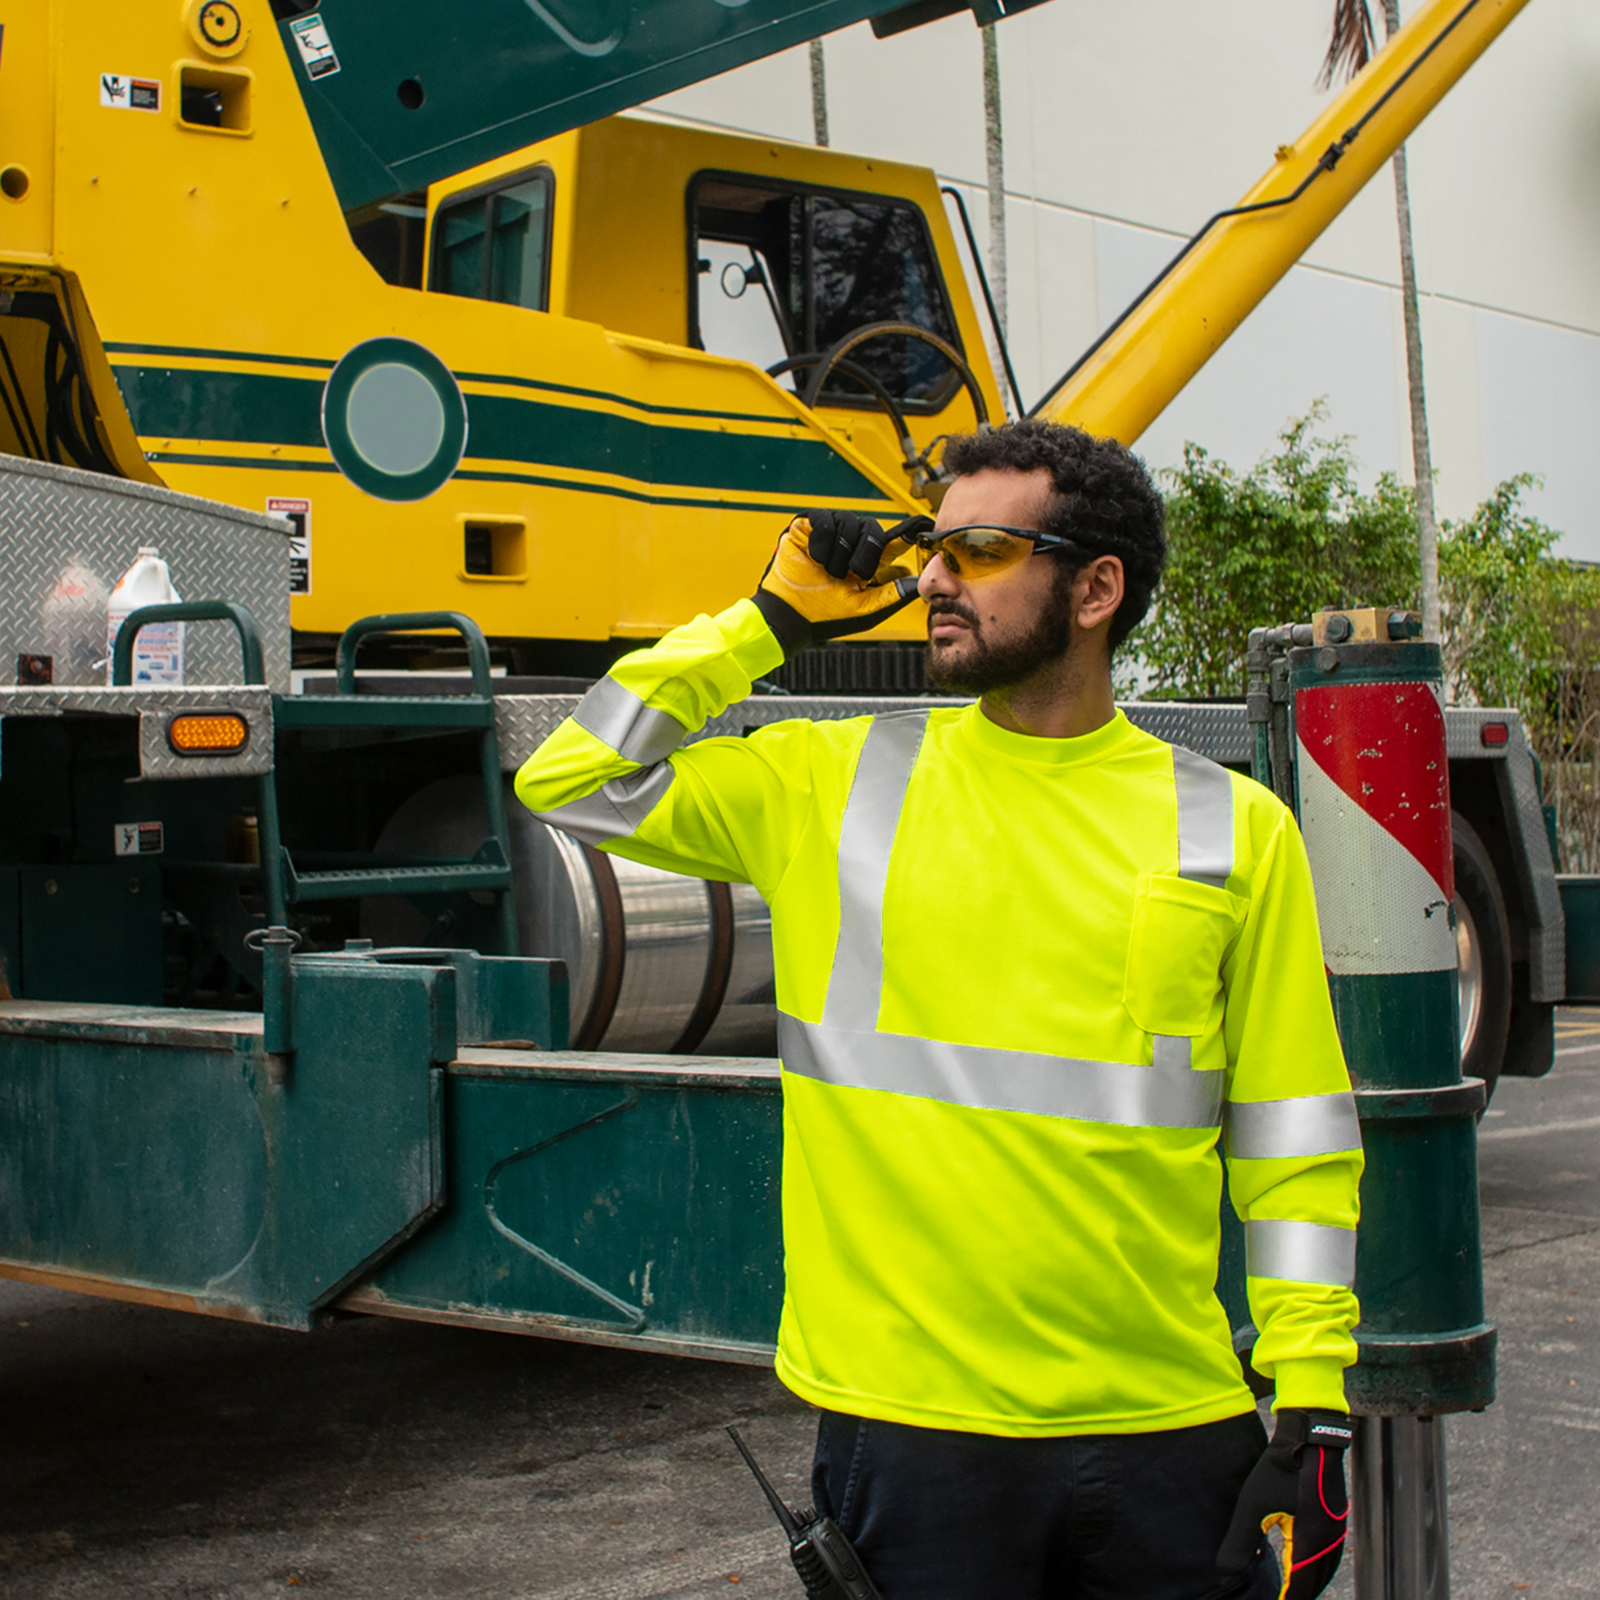 Worker wearing a yellow long sleeve hi vis safety shirt while operating a large green truck in the background